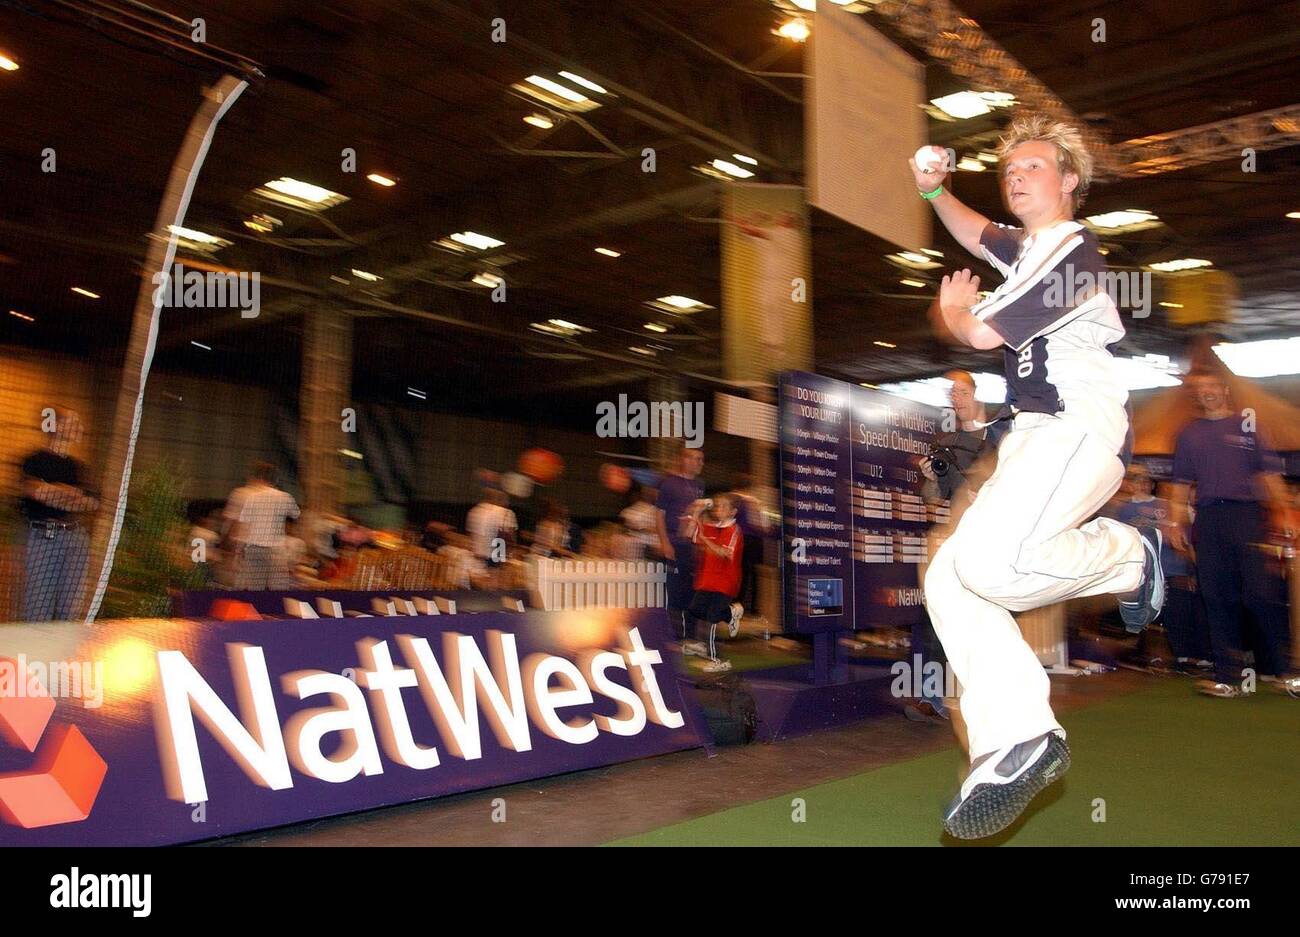 A young competitor takes part in the NatWest Speed Challenge Roadshow at Birmingham's NEC. The fatest bowlers, as recorded by a speed gun, will take part in the nationwide final on July 12 at Lords. Stock Photo